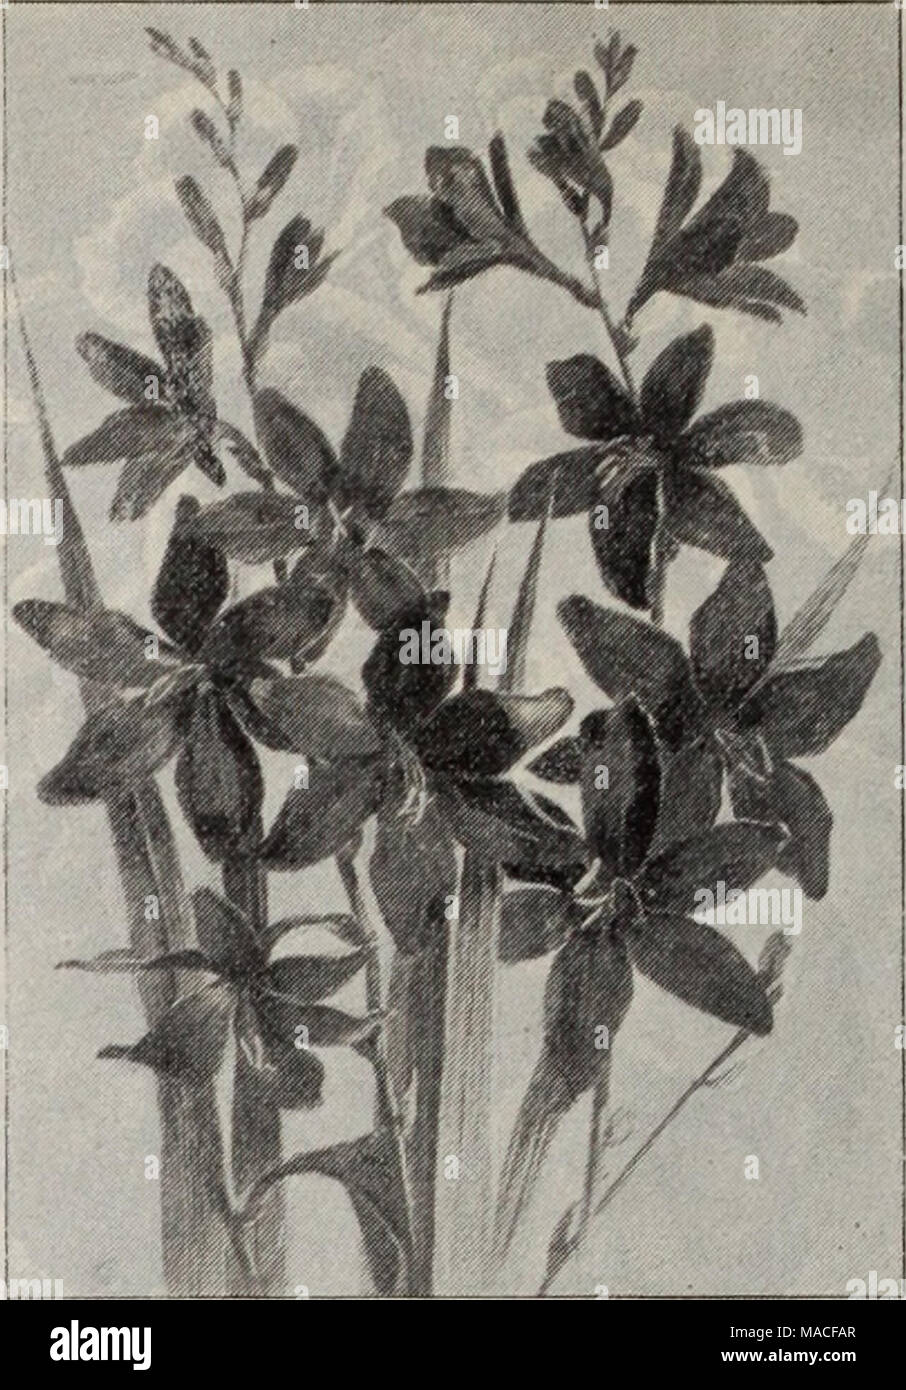 . Dreer's wholesale price list / Henry A. Dreer. . MONTIIULTIA GeBUAMa. Manettia. Per doz. Per 100. Bicolor. 2^-inch pots 60 55 00 Cordifolia. 3 &quot; &quot; 75 6 00 Montbretia Crooosmiseflora Germania. (The New Giant Montbretia.) This new Montbretia has been under our observation for the past four years, when it first originated, and we can fully endorse the originator's description, which follows herewith : &quot; This splendid acquisition is the result of a cross between Crocosmia aurea imperialis and some varieties of Montbretia. Having inherited the vigorous growth of the Crocosmias, it, Stock Photo